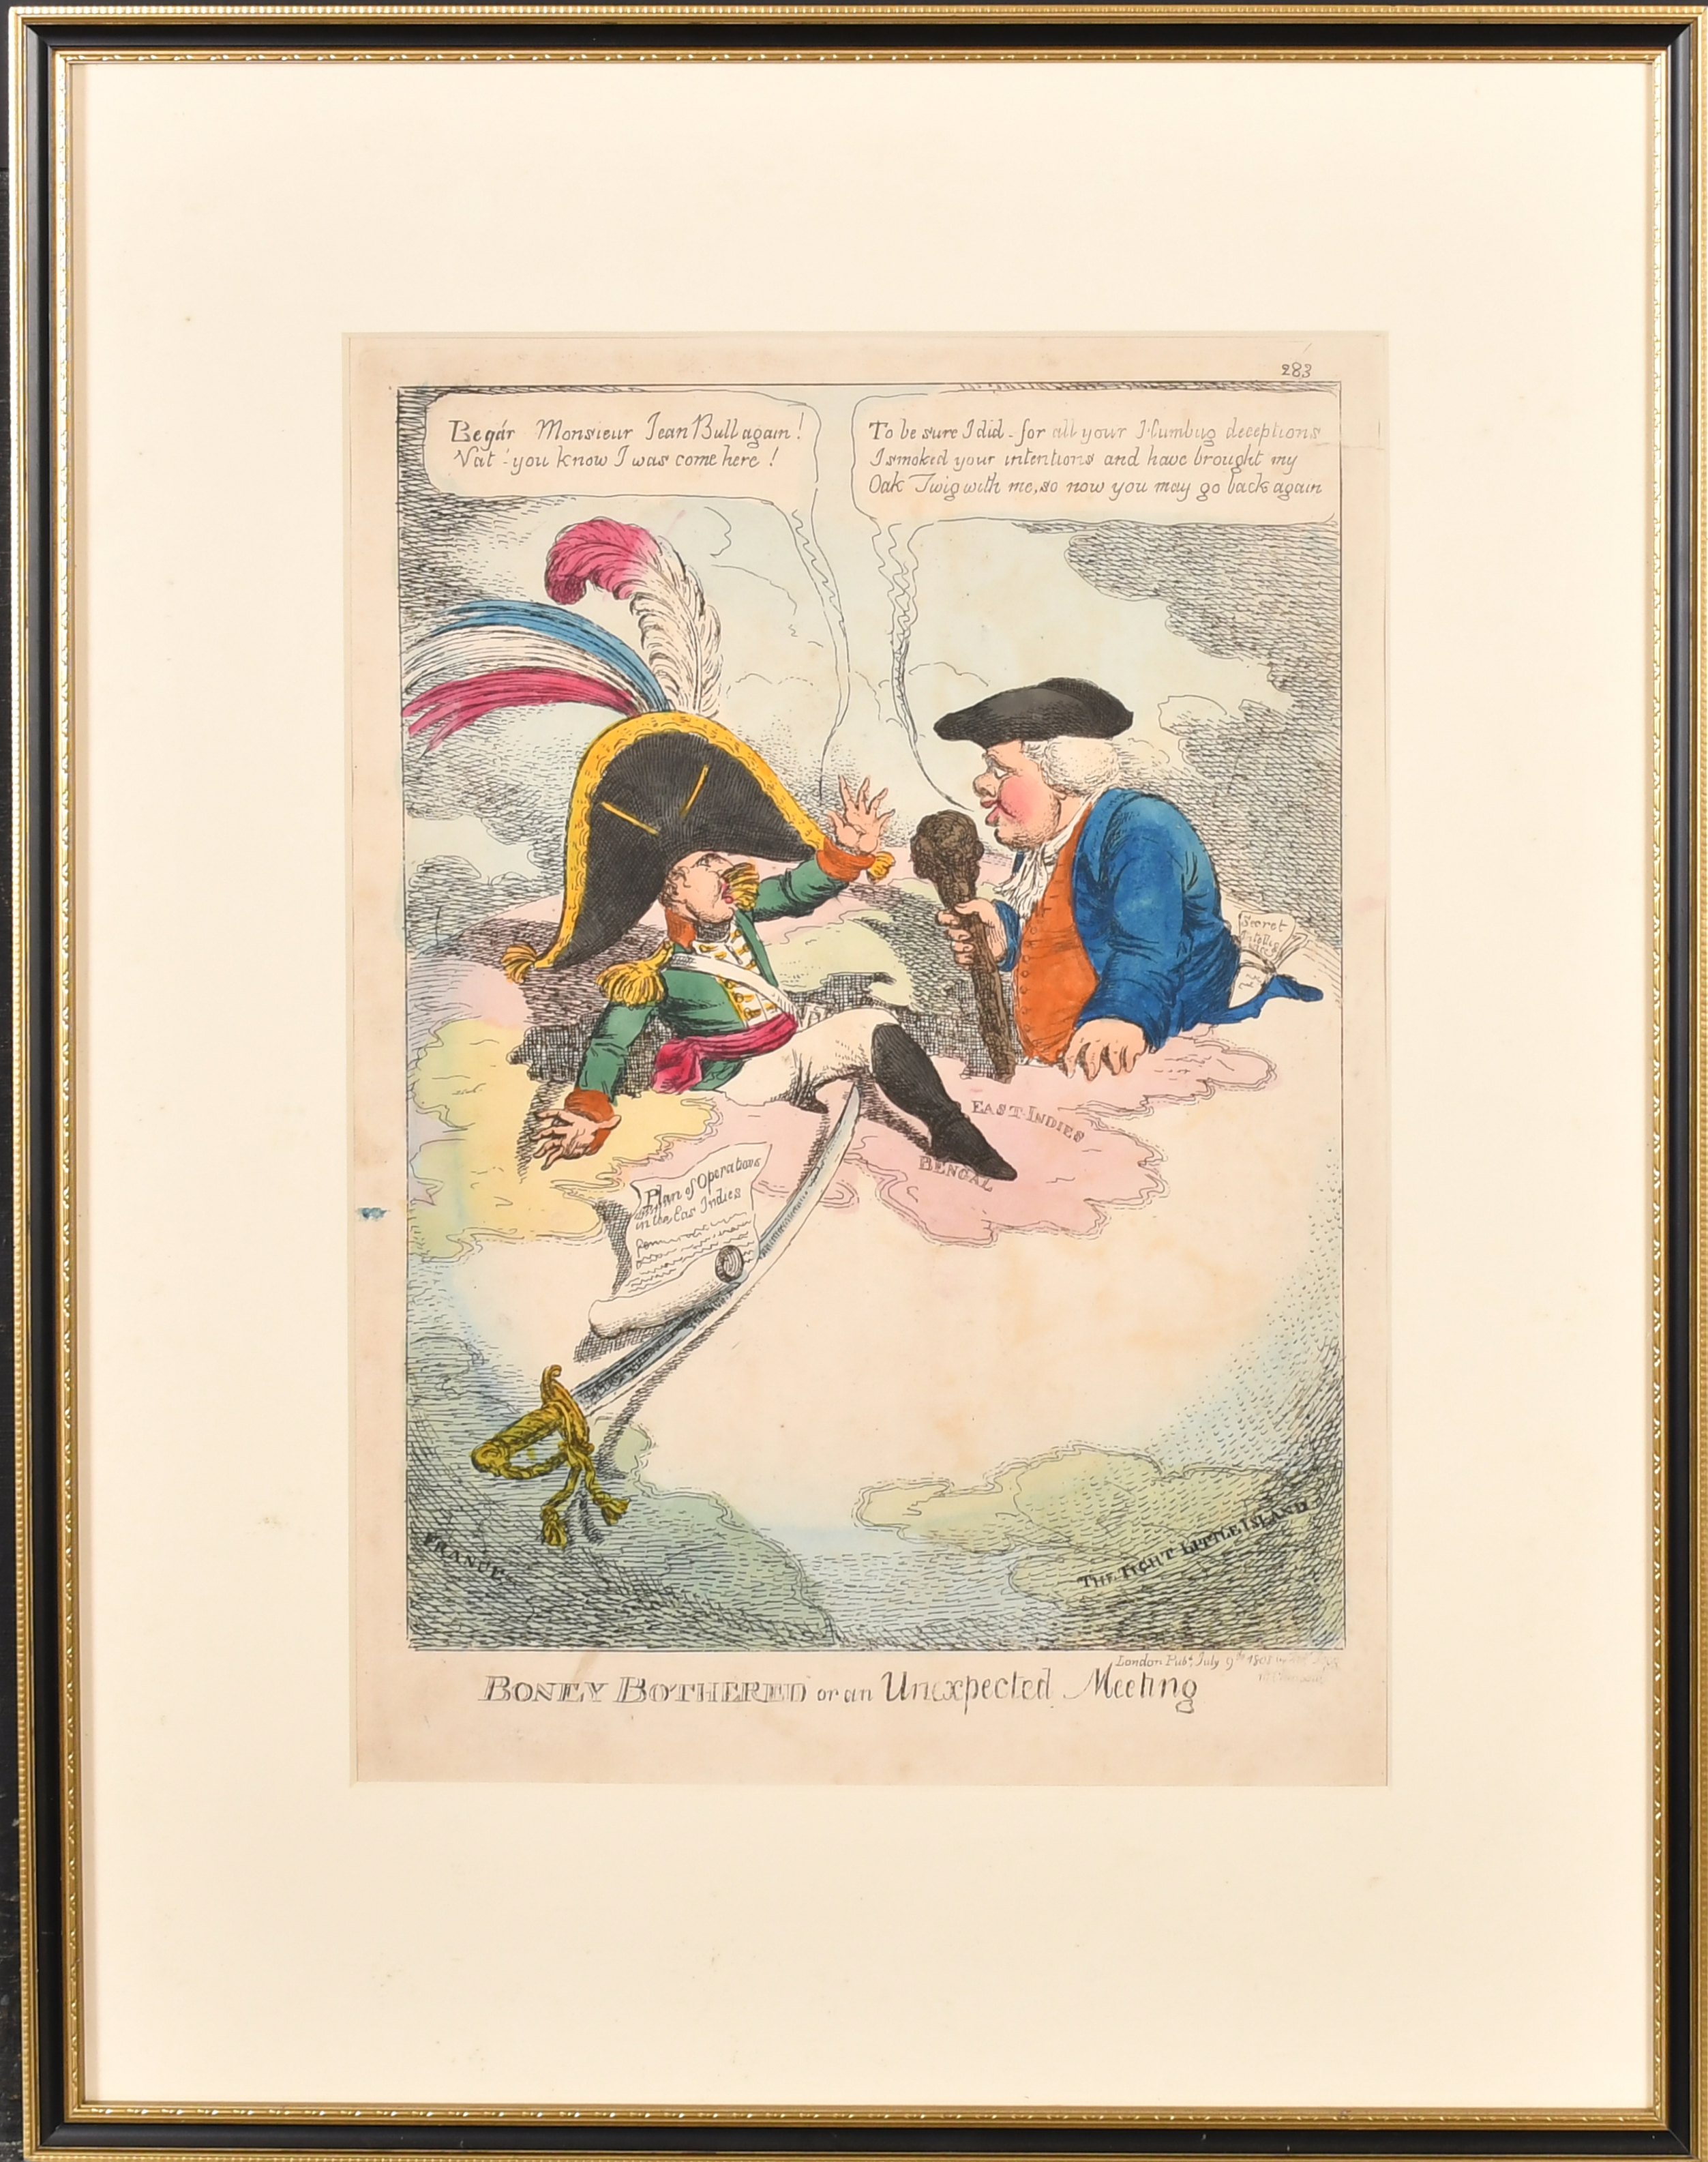 Charles Williams (act.1787-1830) British. "Boney Bothered or An Unexpected Meeting", Hand coloured - Image 2 of 5